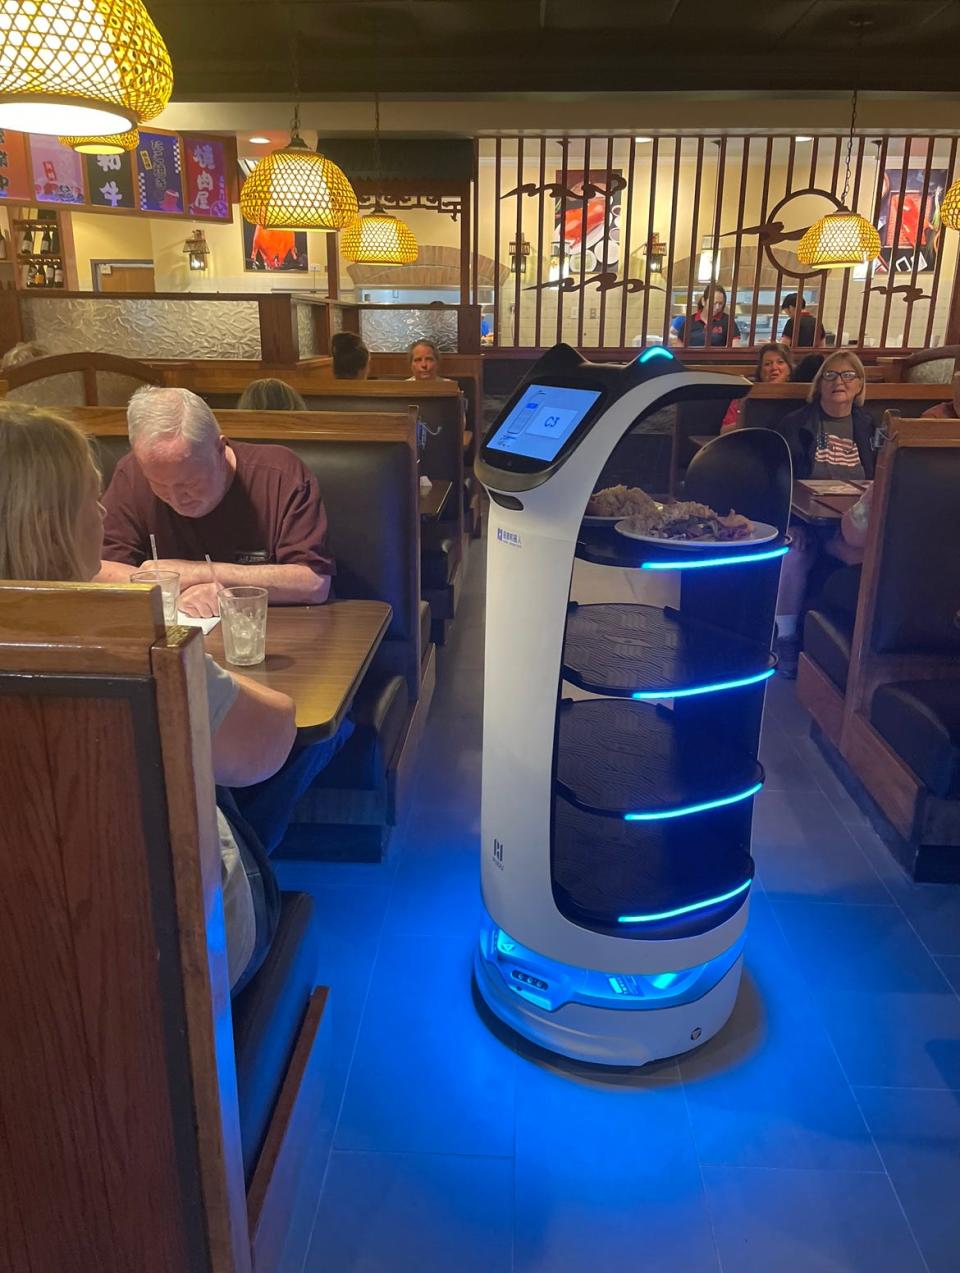 A robot at the new Tian Fu Asian Bistro carries an order from the kitchen to diners Marilyn and Merle Tompkins at Tian Fu Asian Bistro, 7525 E. Washington St., Indianapolis, on June 26, 2023.